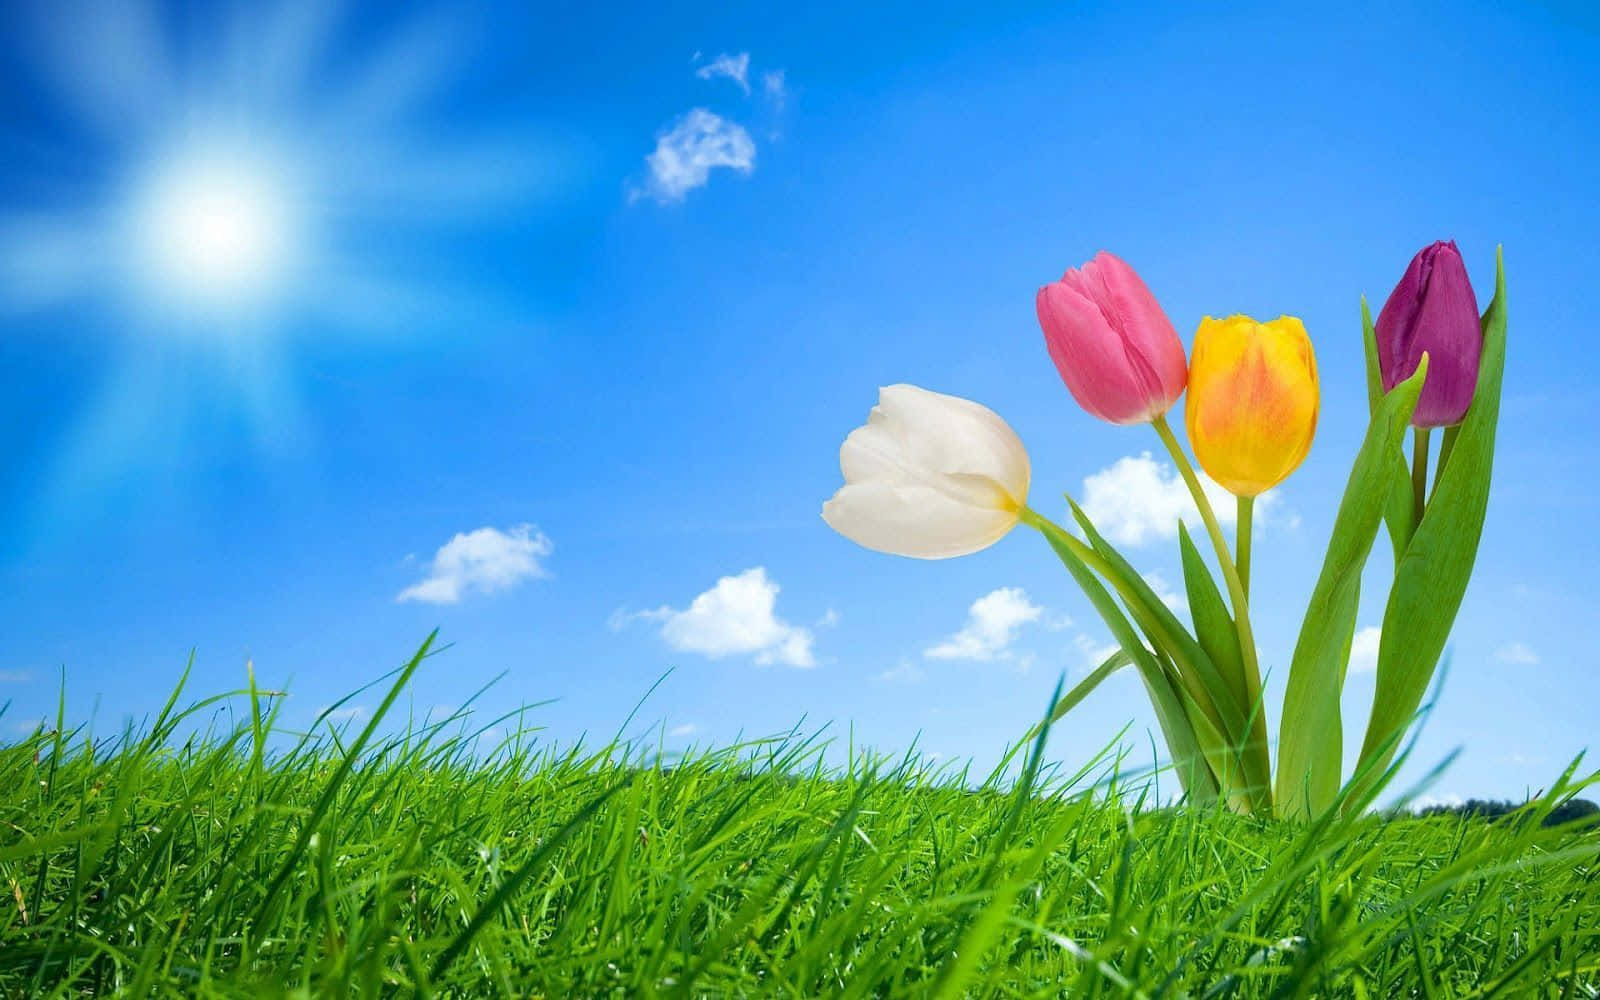 Colorful Tulips In Grassy Field Spring Background